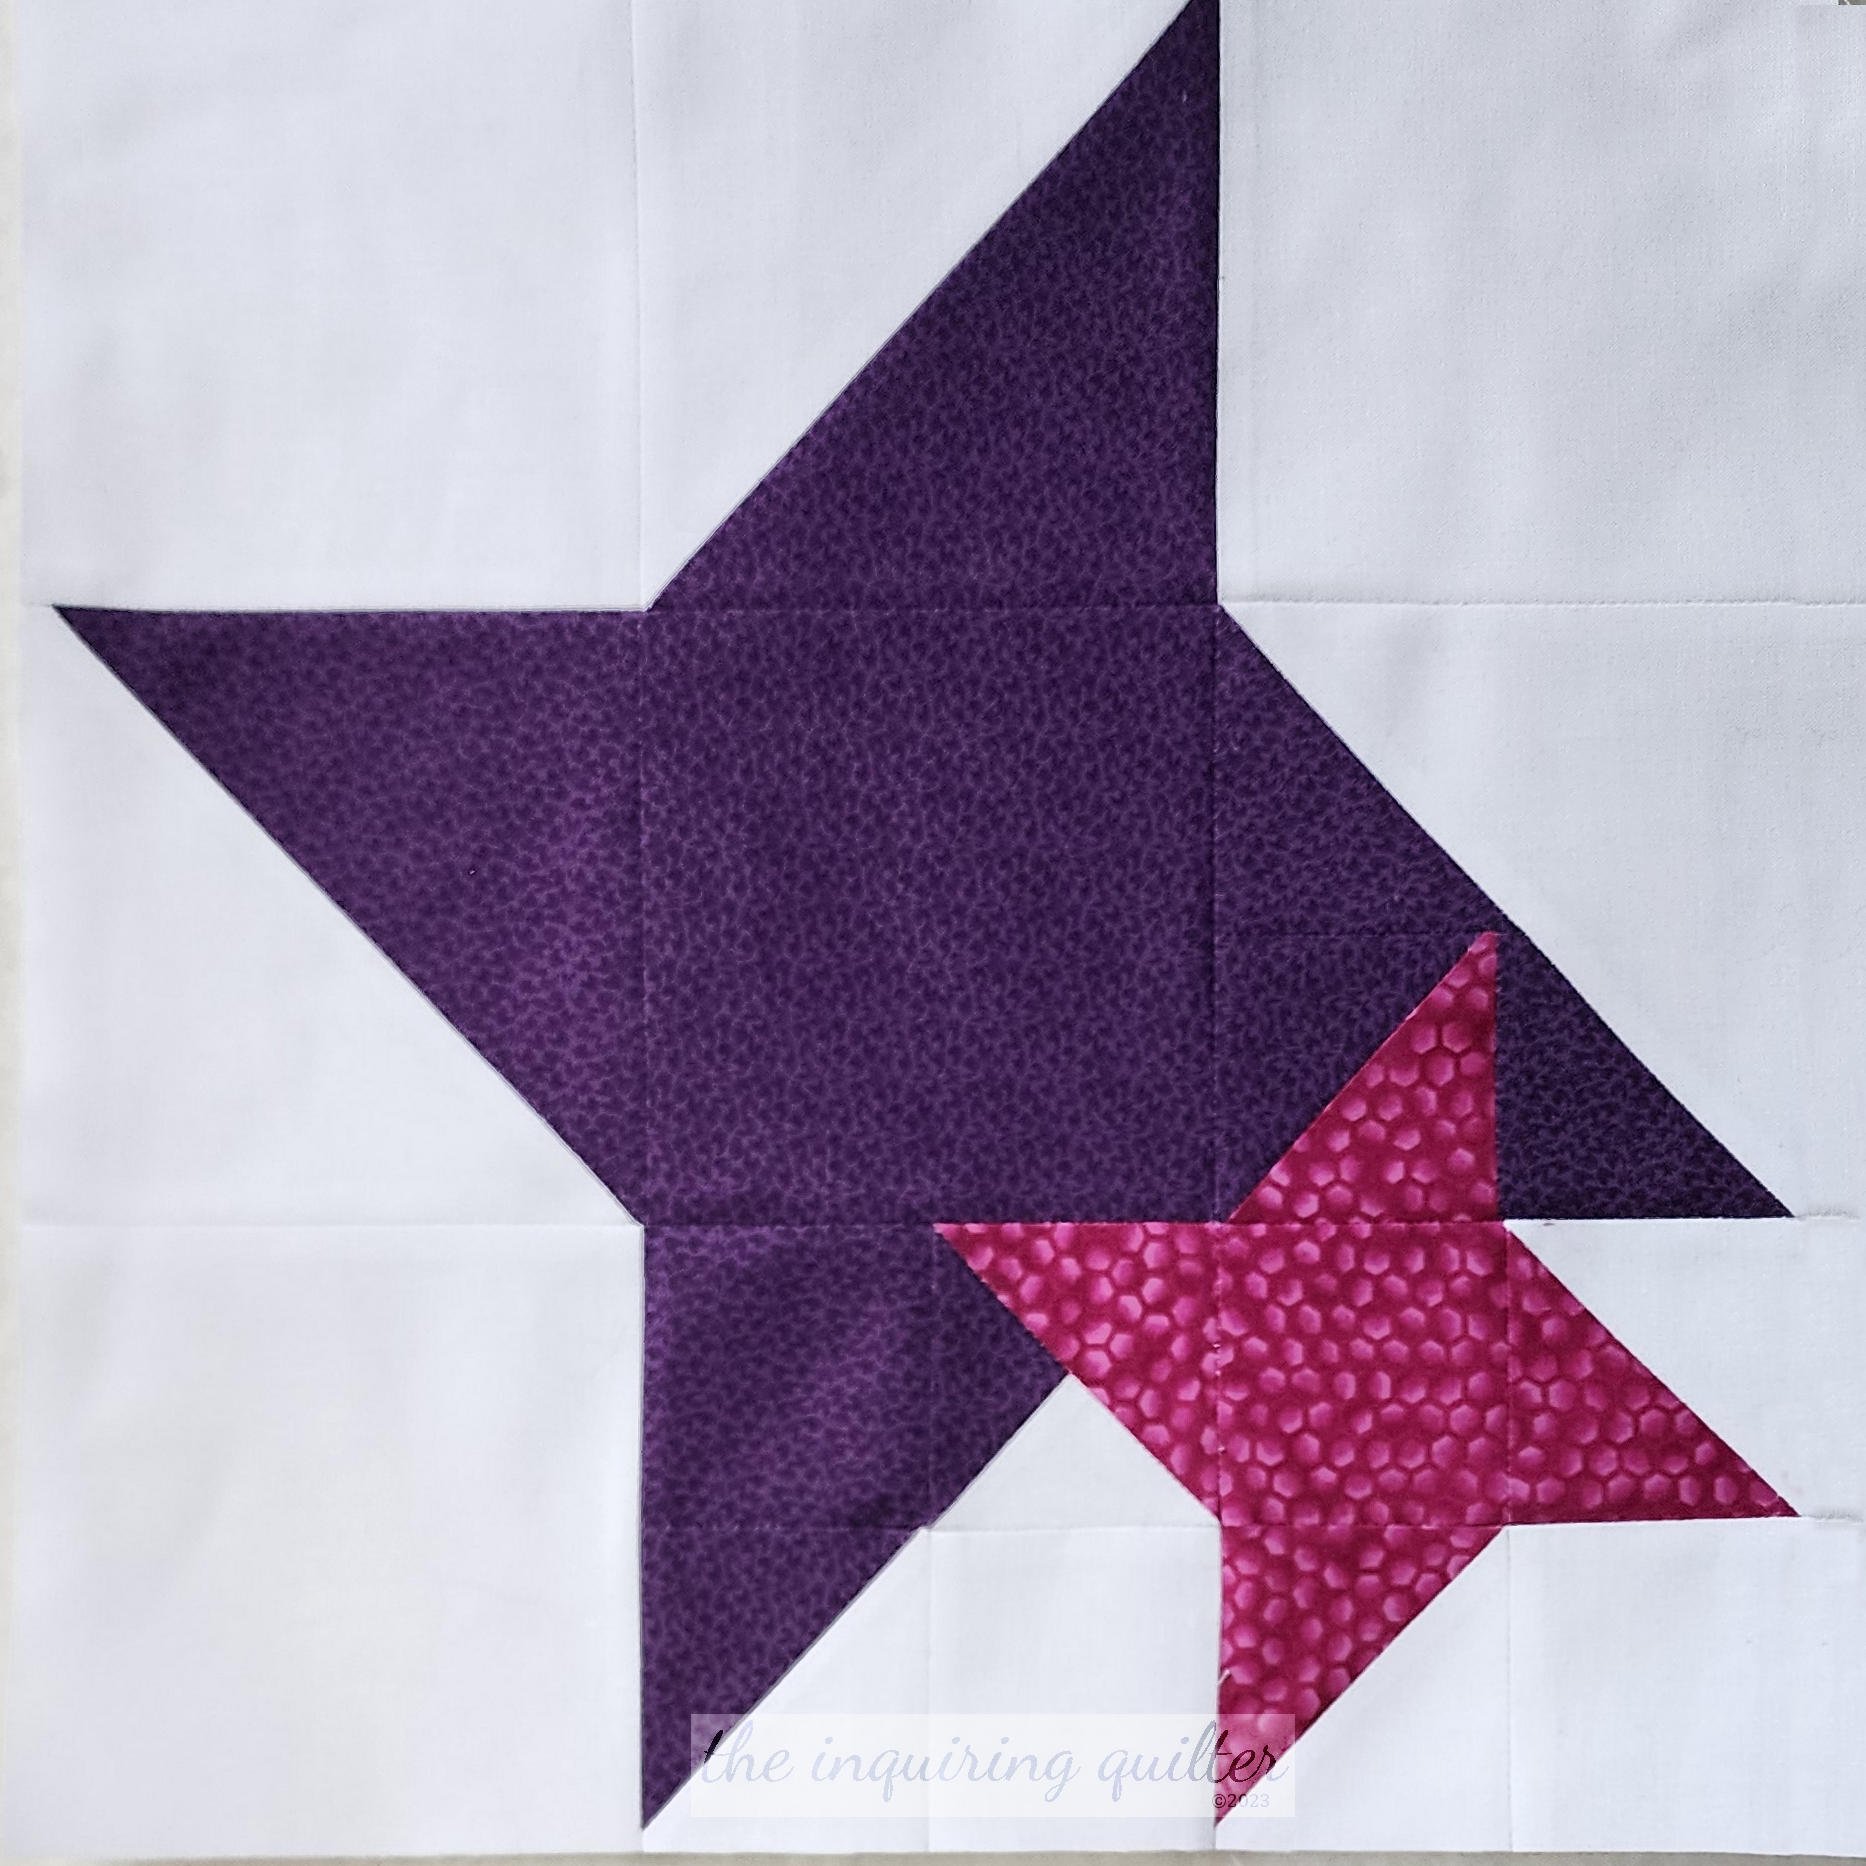 Modern Quilt-as-you-Go pattern book - Diary of a Quilter - a quilt blog